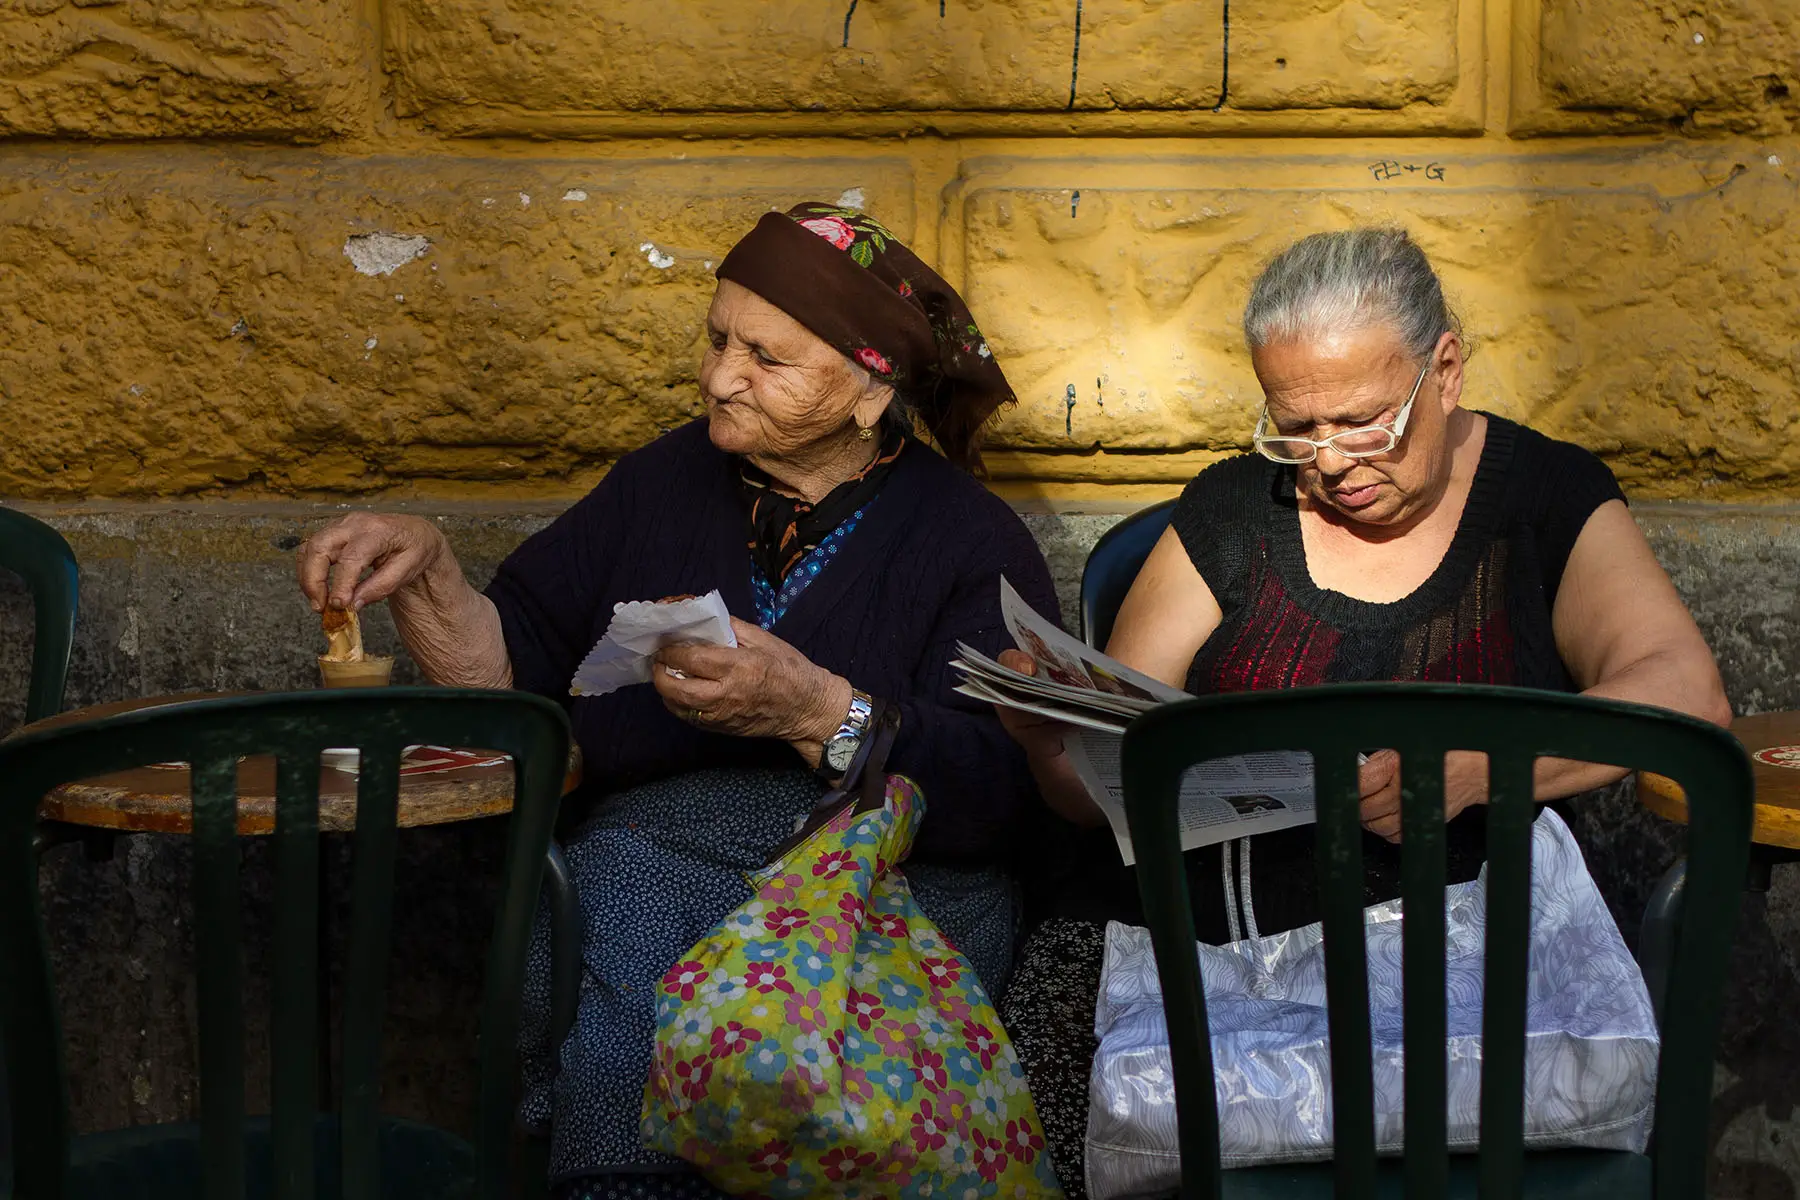 Two senior women relax against a sunlit yellow wall at an outdoor cafe in early morning in the Trastevere neighborhood. One woman reads the paper while the other dunks a pastry into her coffee.